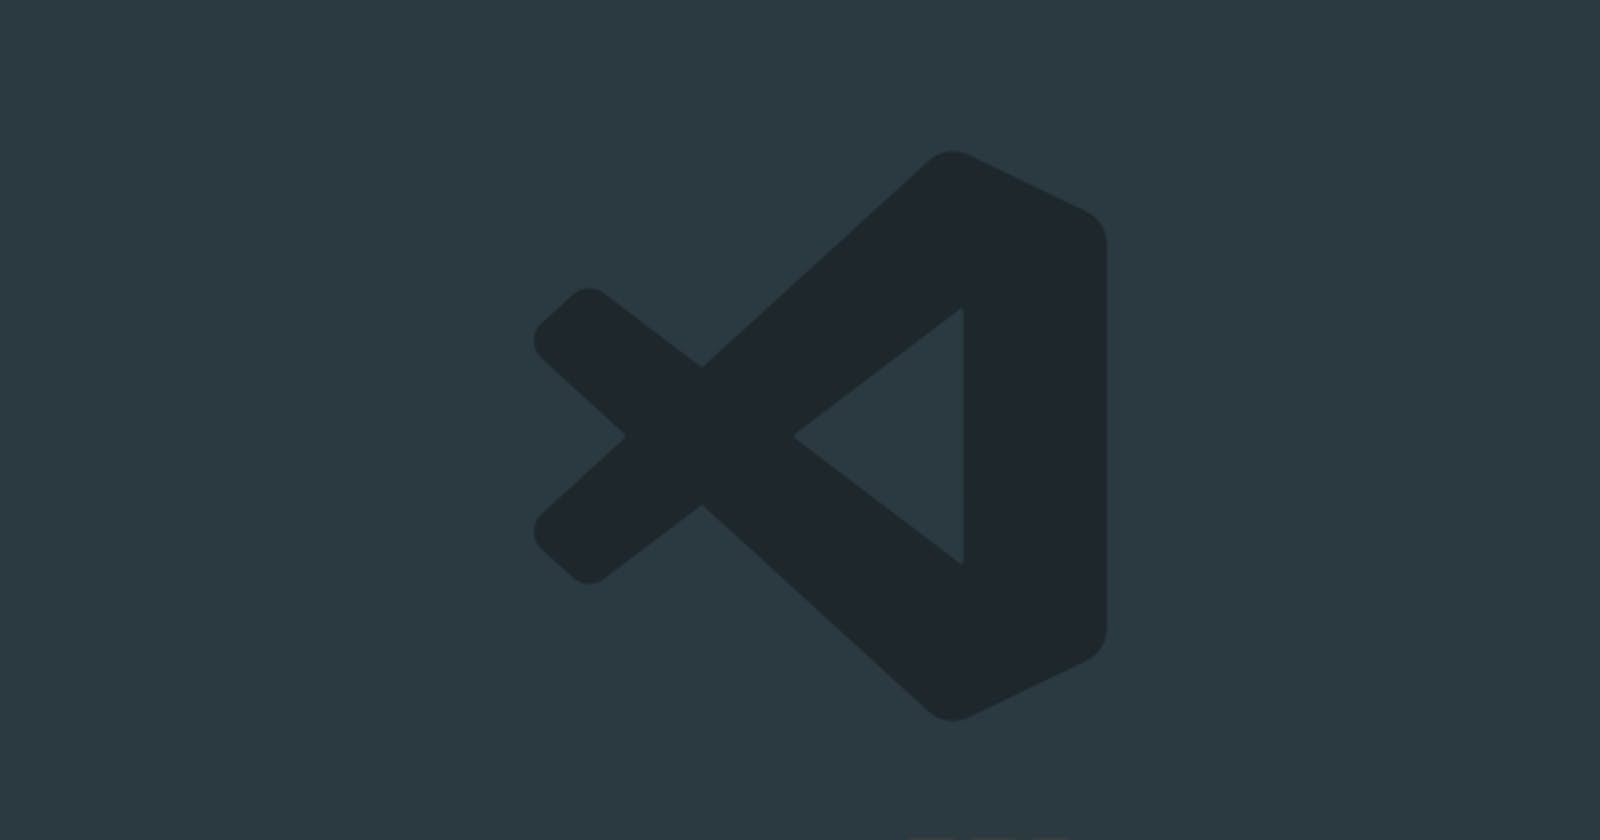 10 Useful VS Code Extensions for Every Developer